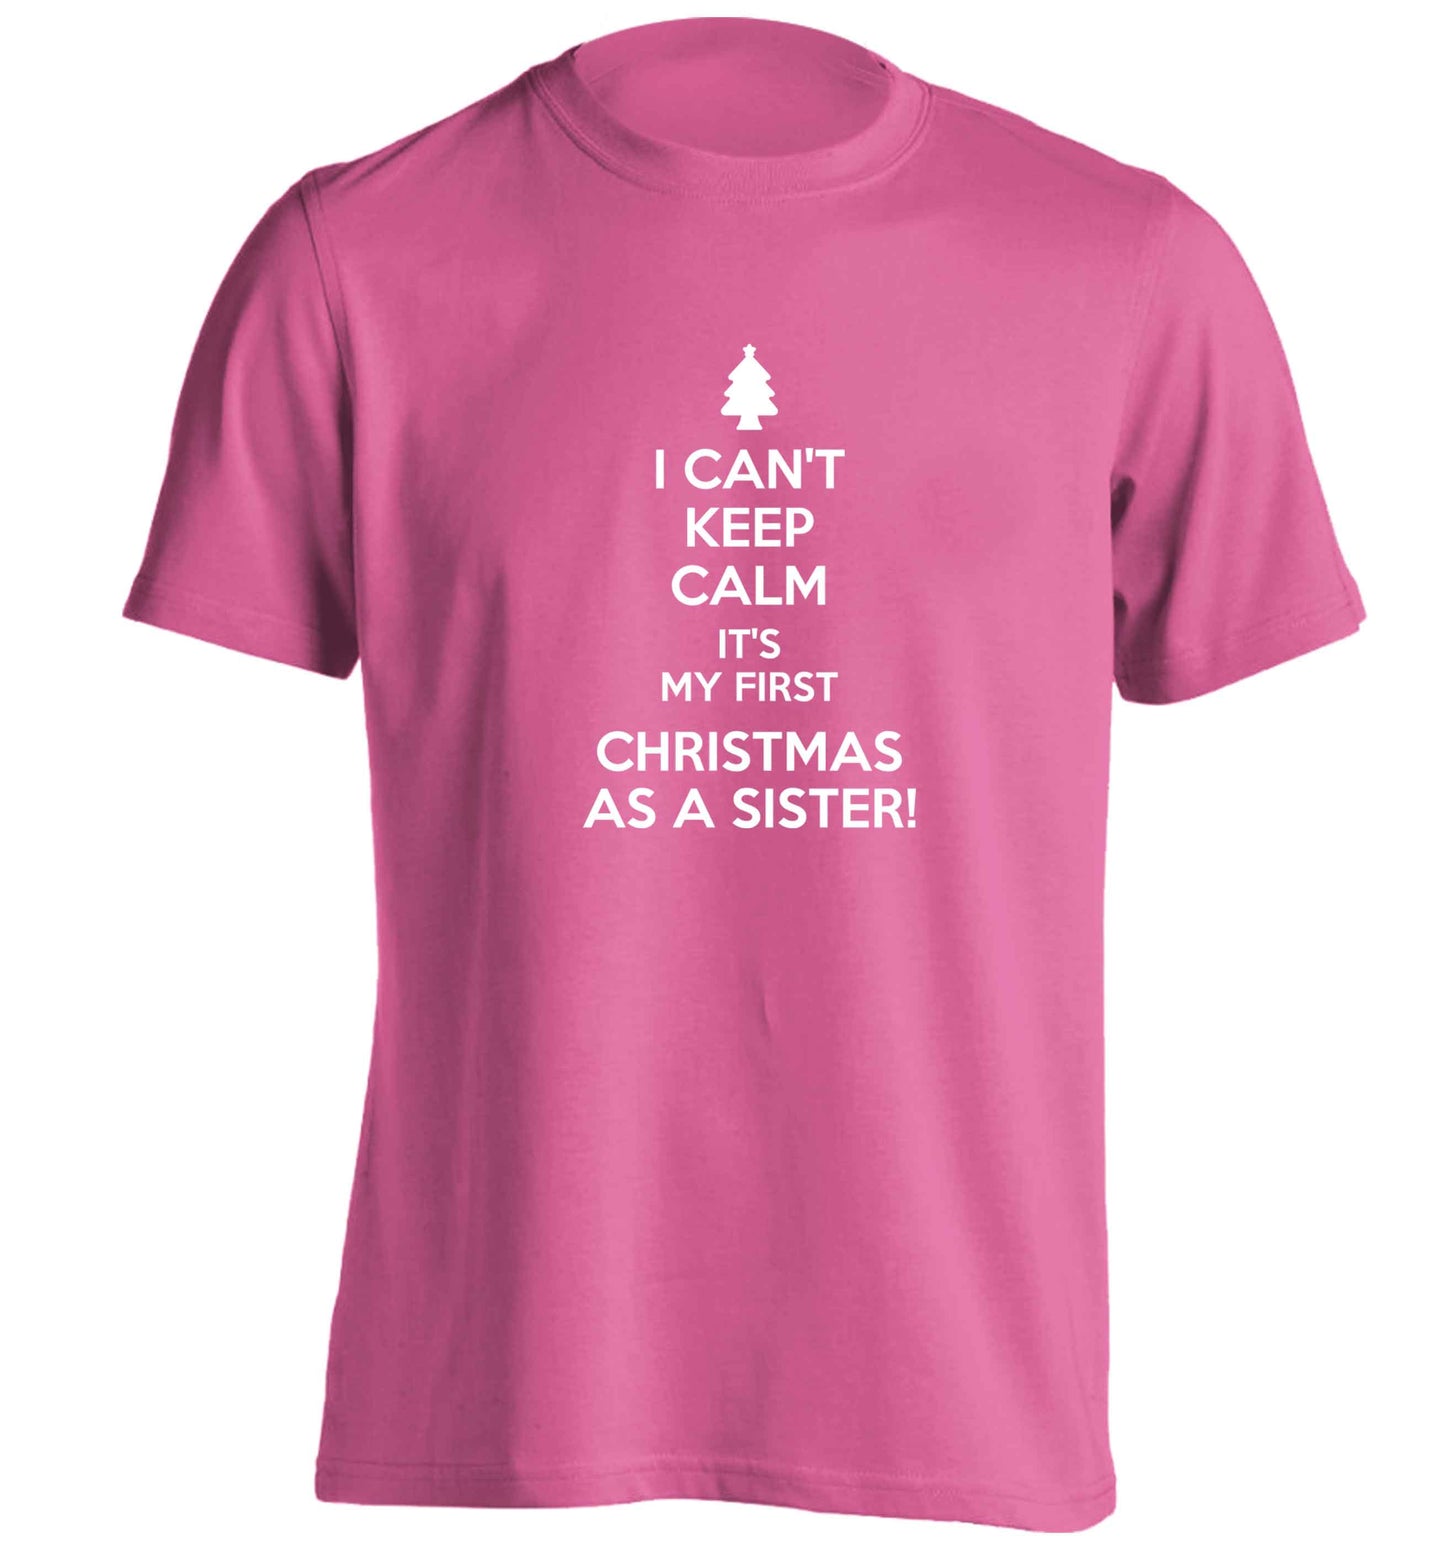 I can't keep calm it's my first Christmas as a sister! adults unisex pink Tshirt 2XL